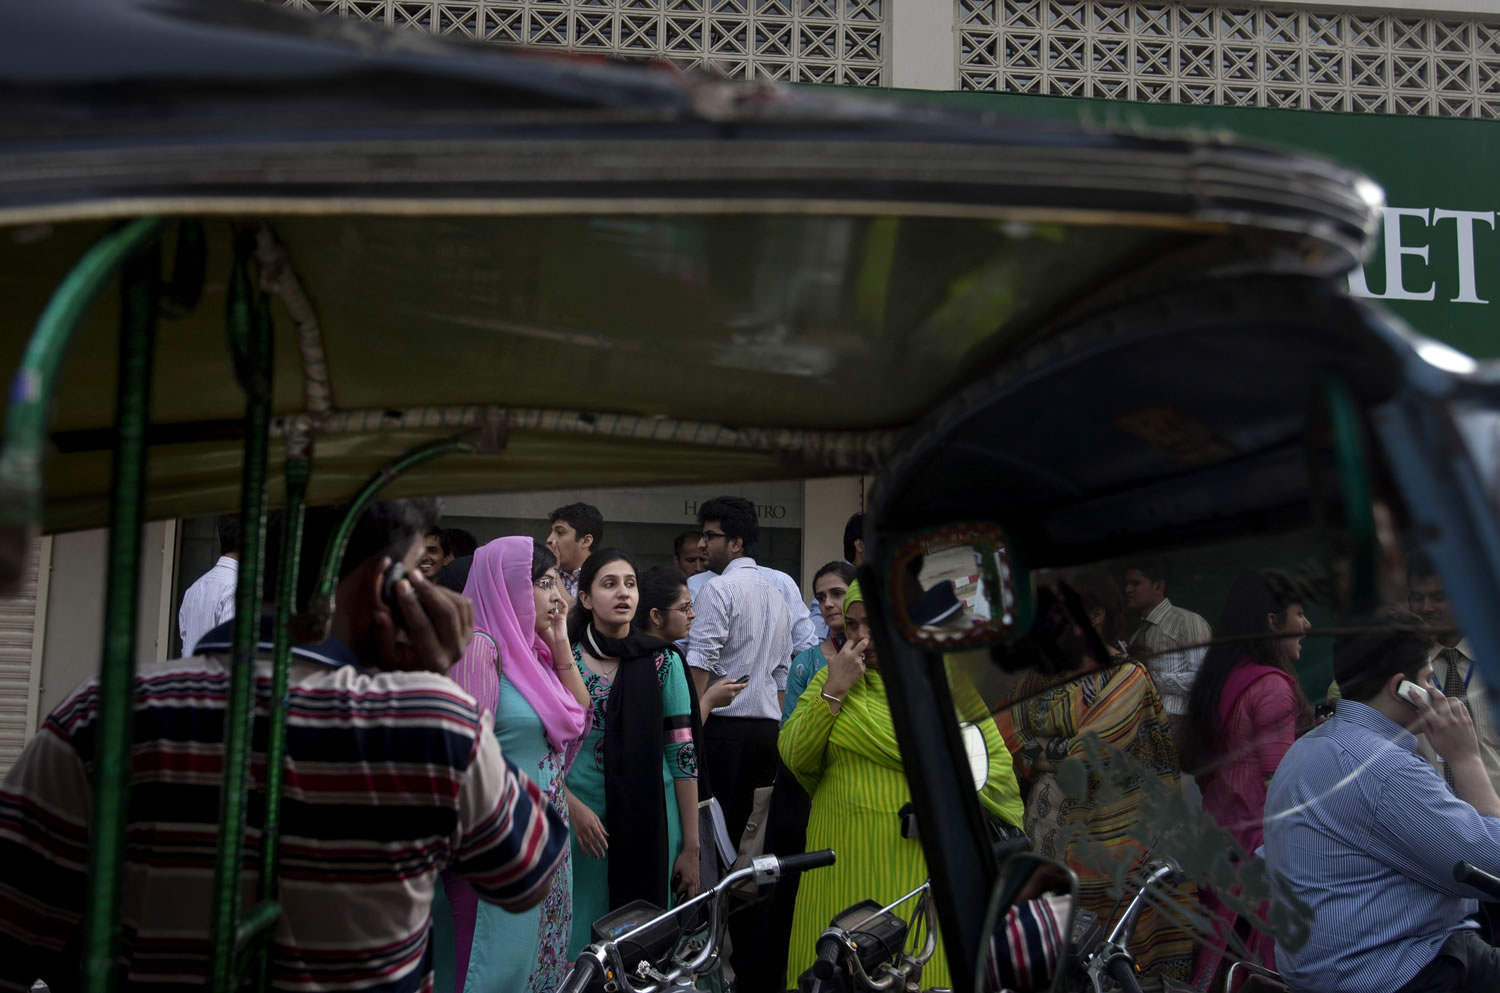 People evacuate buildings and gather on a road after a tremor of an earthquake was felt in Karachi, Pakistan, on Tuesday.